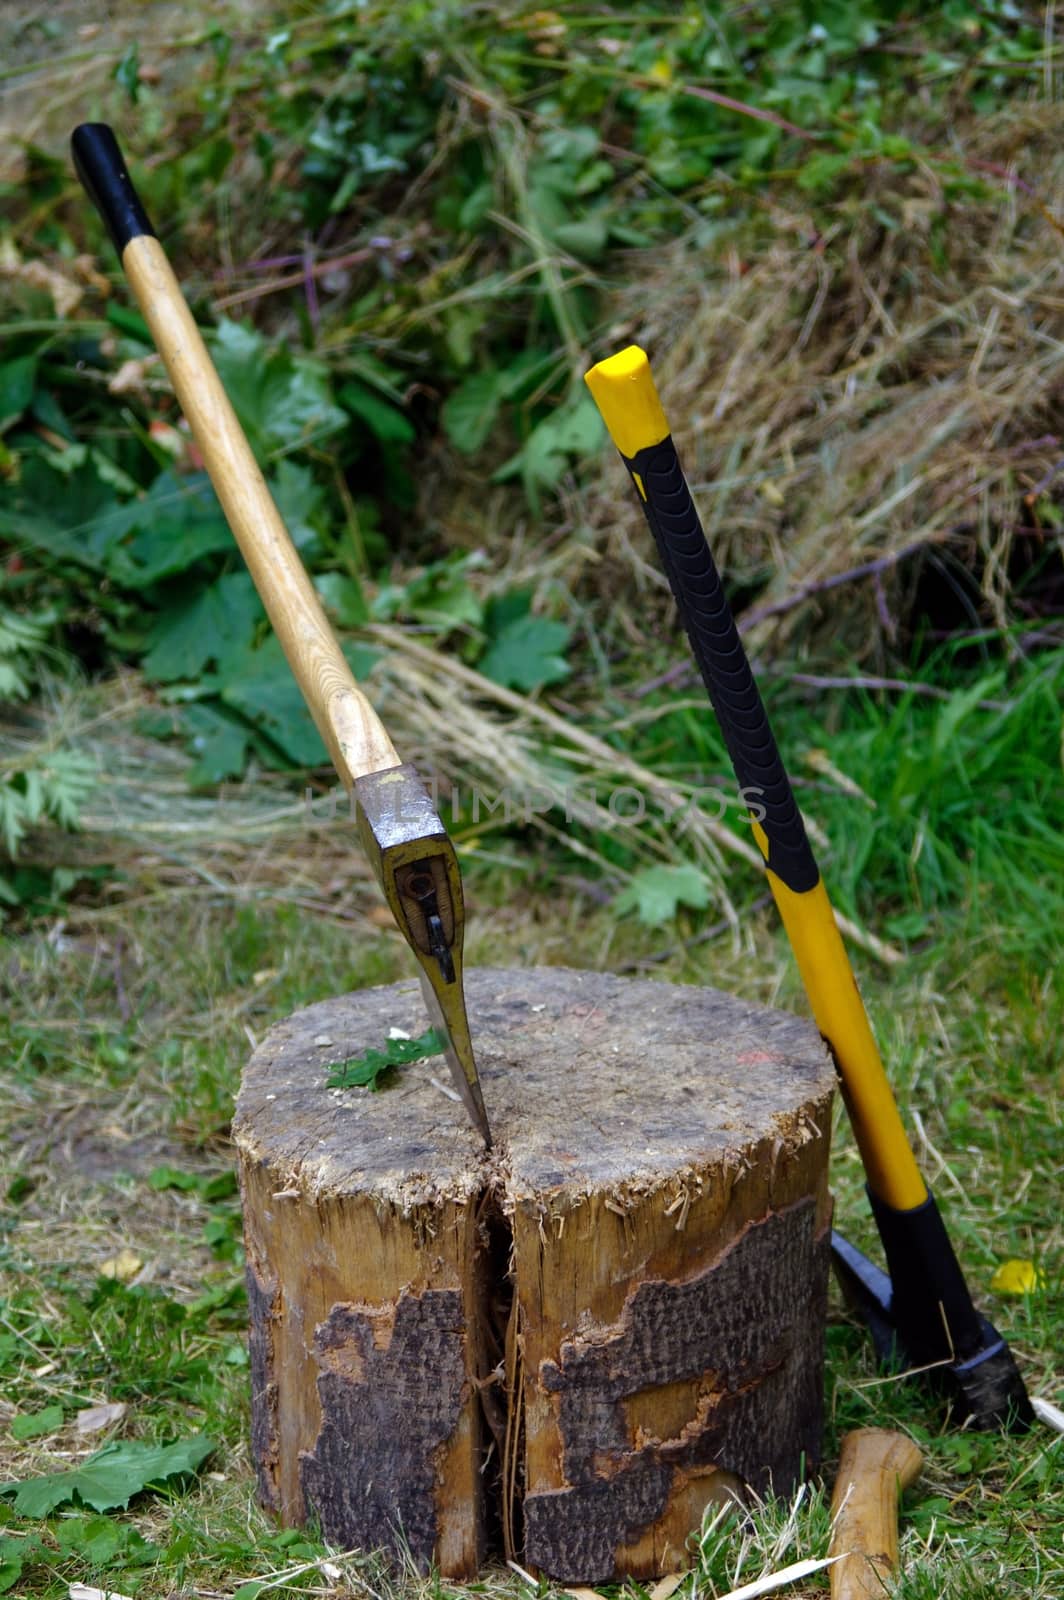 Ax in the deck on a background of green grass and firewood